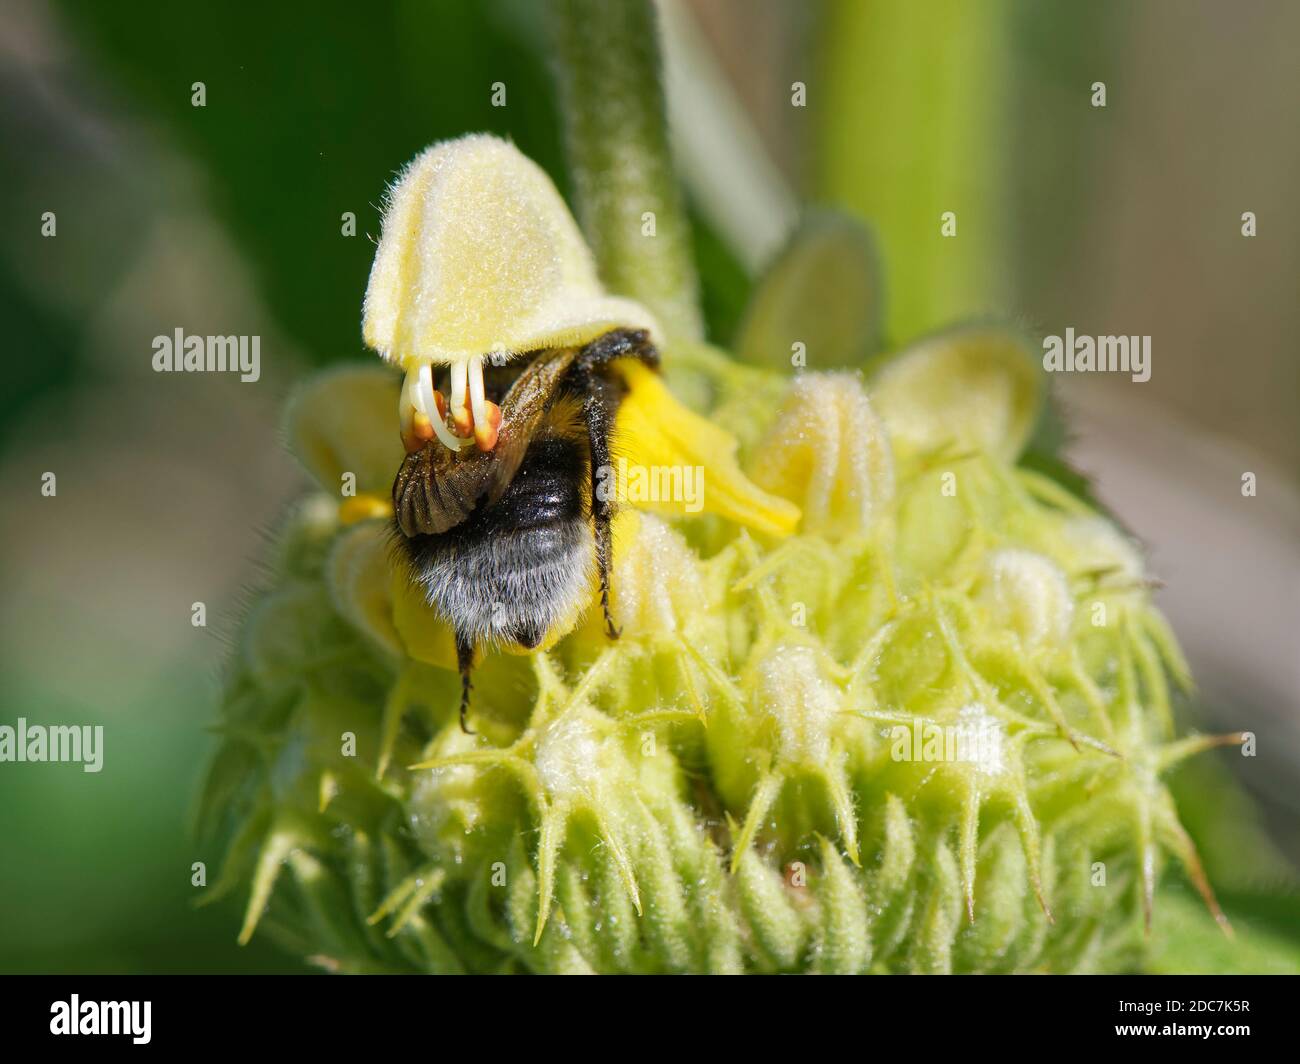 Buff-tailed bumblebee (Bombus terrestris) visiting Turkish sage (Phlomis russeliana) flower whose anthers have been triggered to lower onto its back. Stock Photo